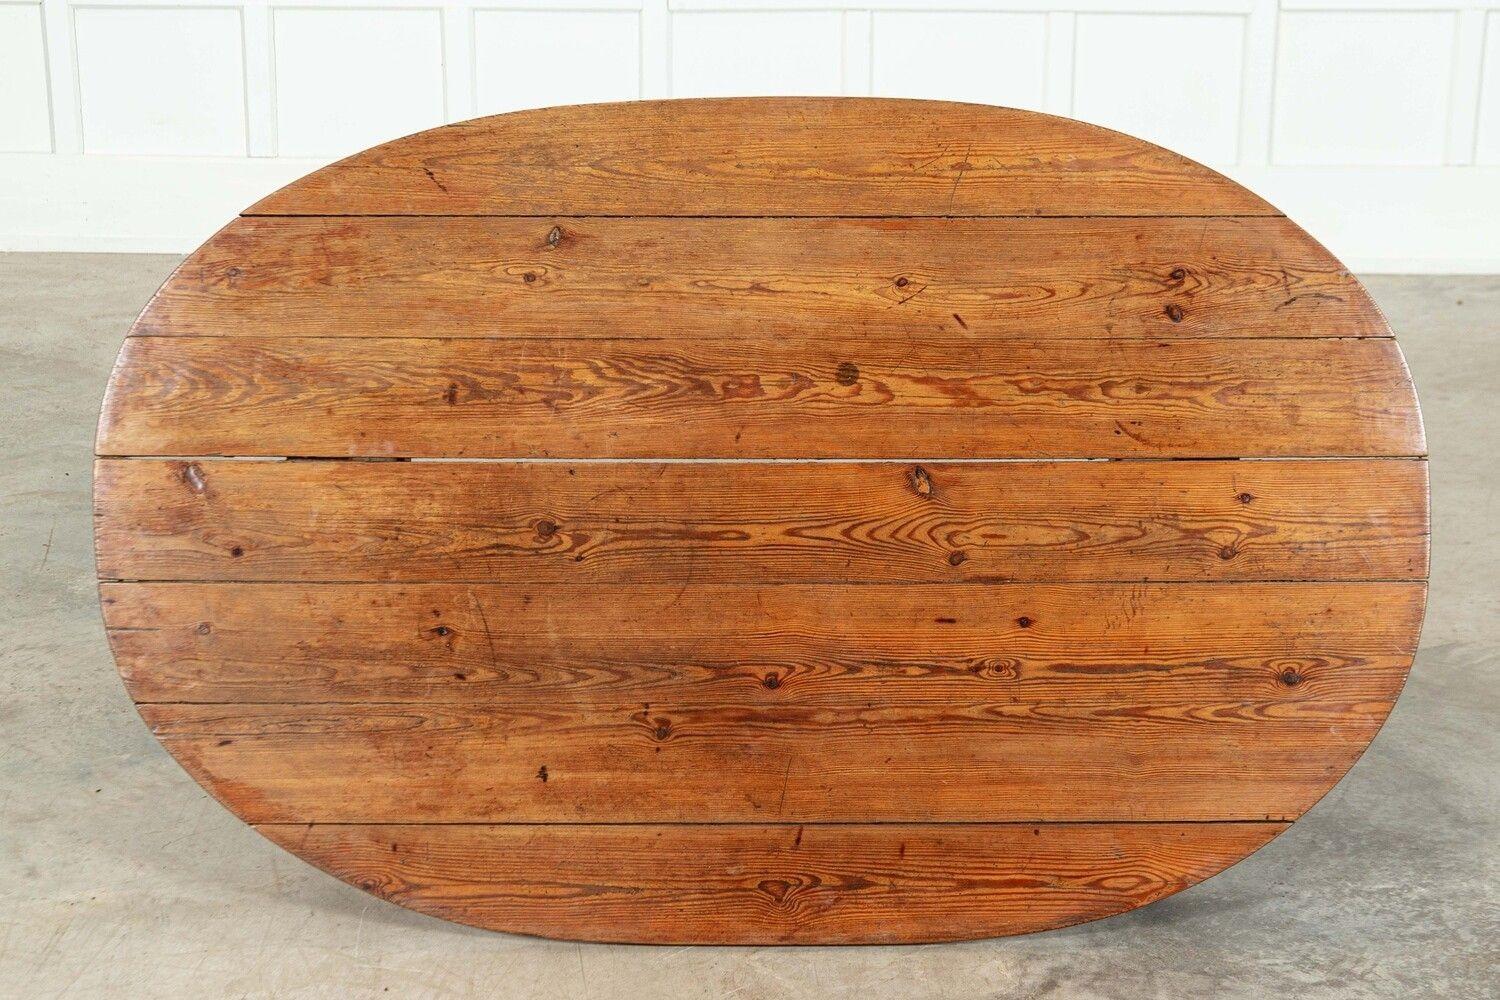 circa 1900
English Pine Oval Refectory Table
sku 1793
W148 x D93 x H73 cm
Weight 13 kg